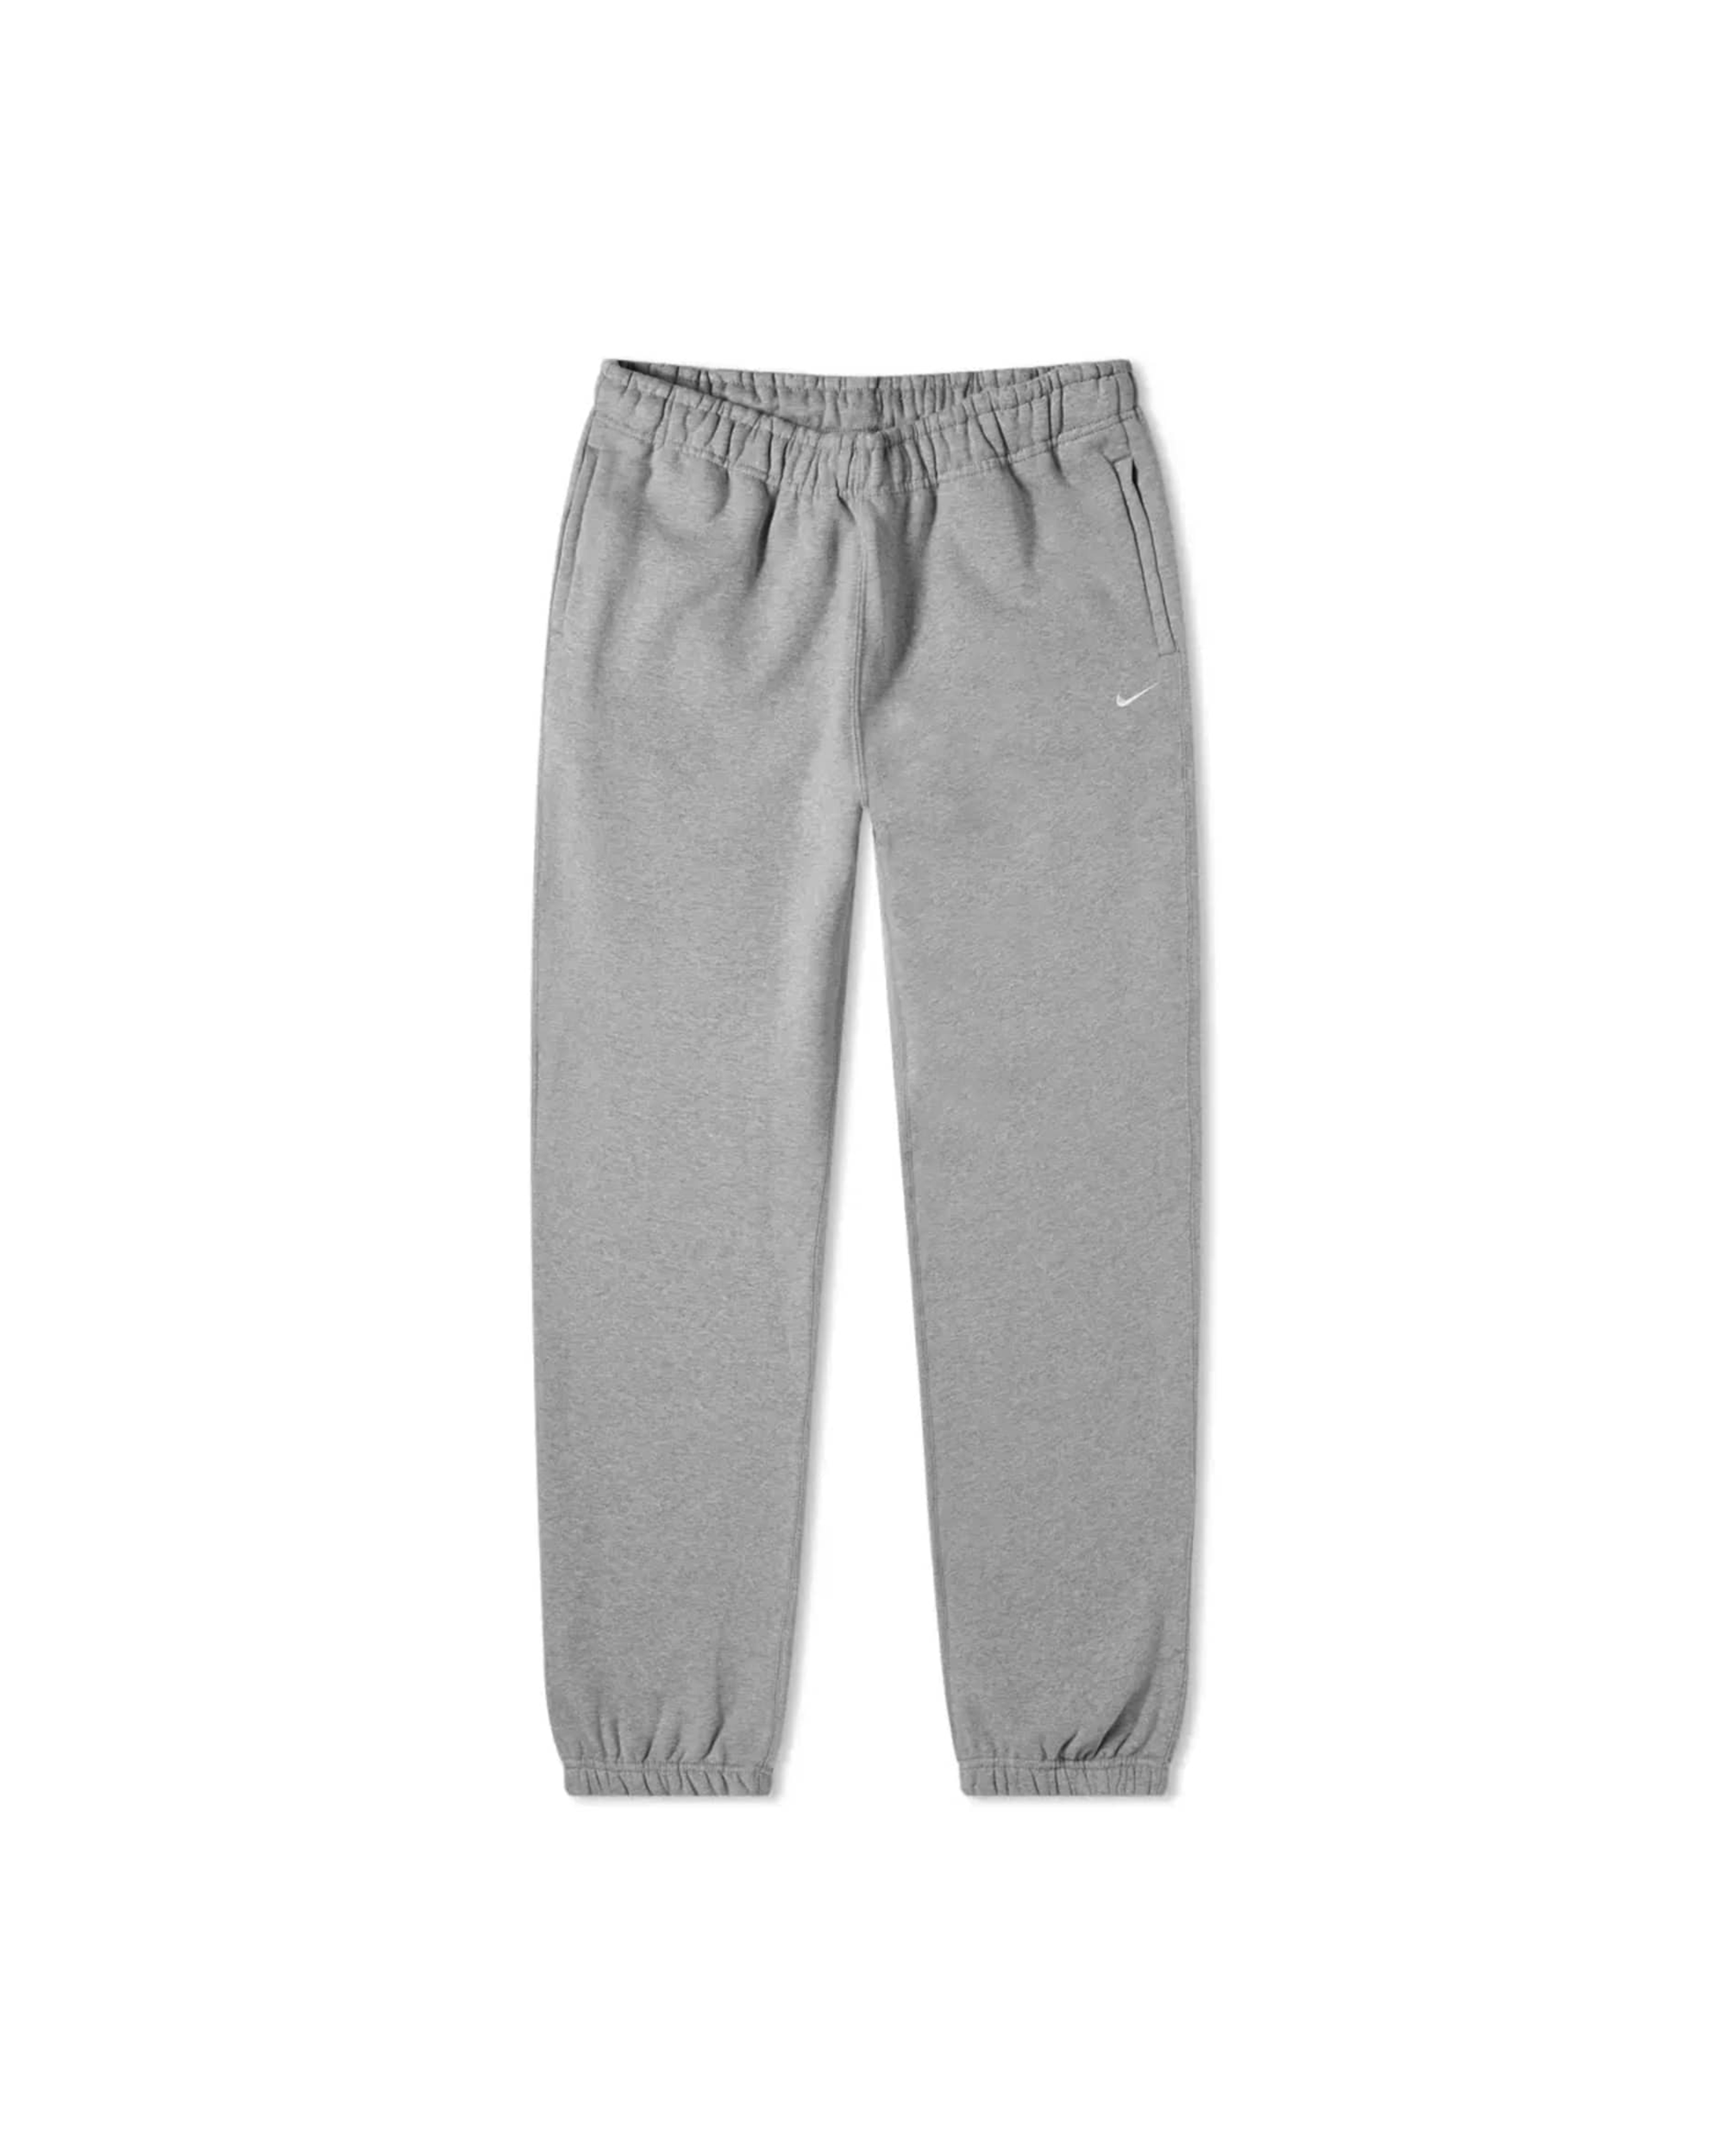 Solo Swoosh Sweatpant - Dark Gray Heather / White – HIGHS AND LOWS